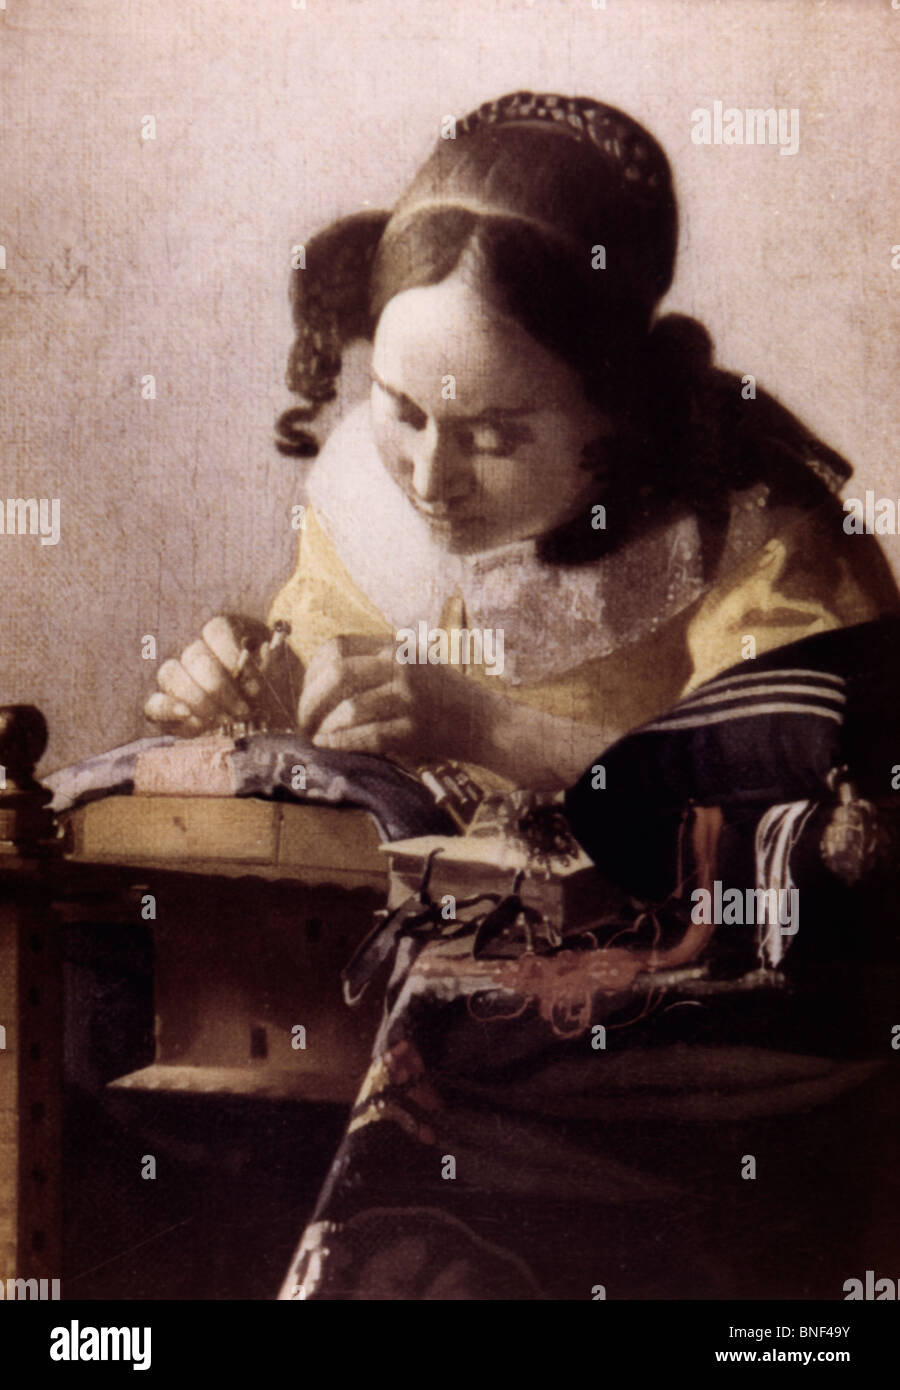 The Lace Maker by Jan Vermeer of Delft, c. 1664, France, Paris, Musee du Louvre Stock Photo